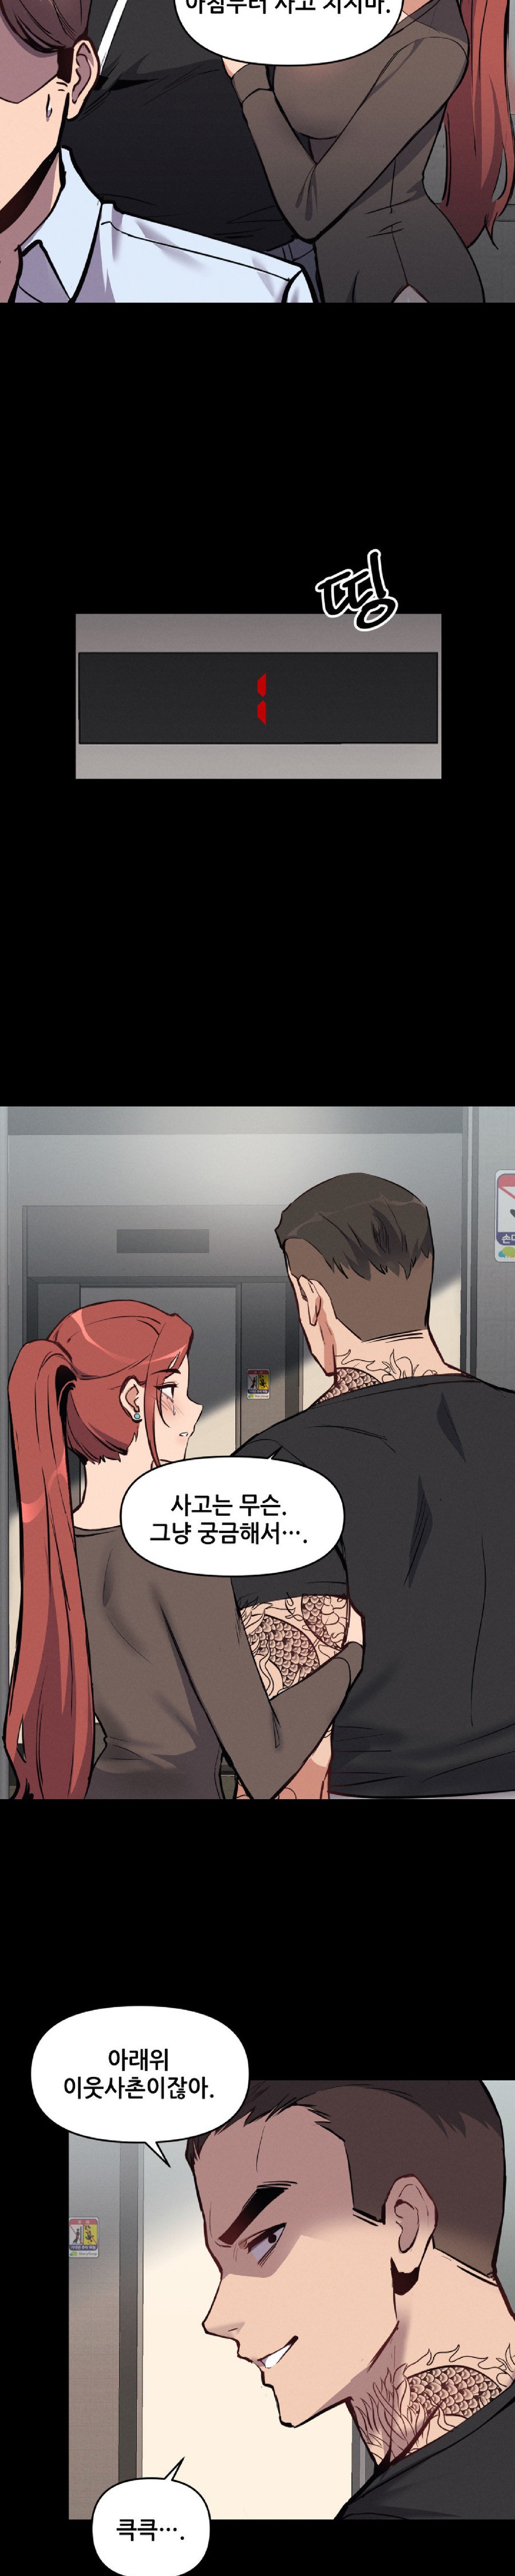 My Life is a Piece of Cake Raw - Chapter 3 Page 6